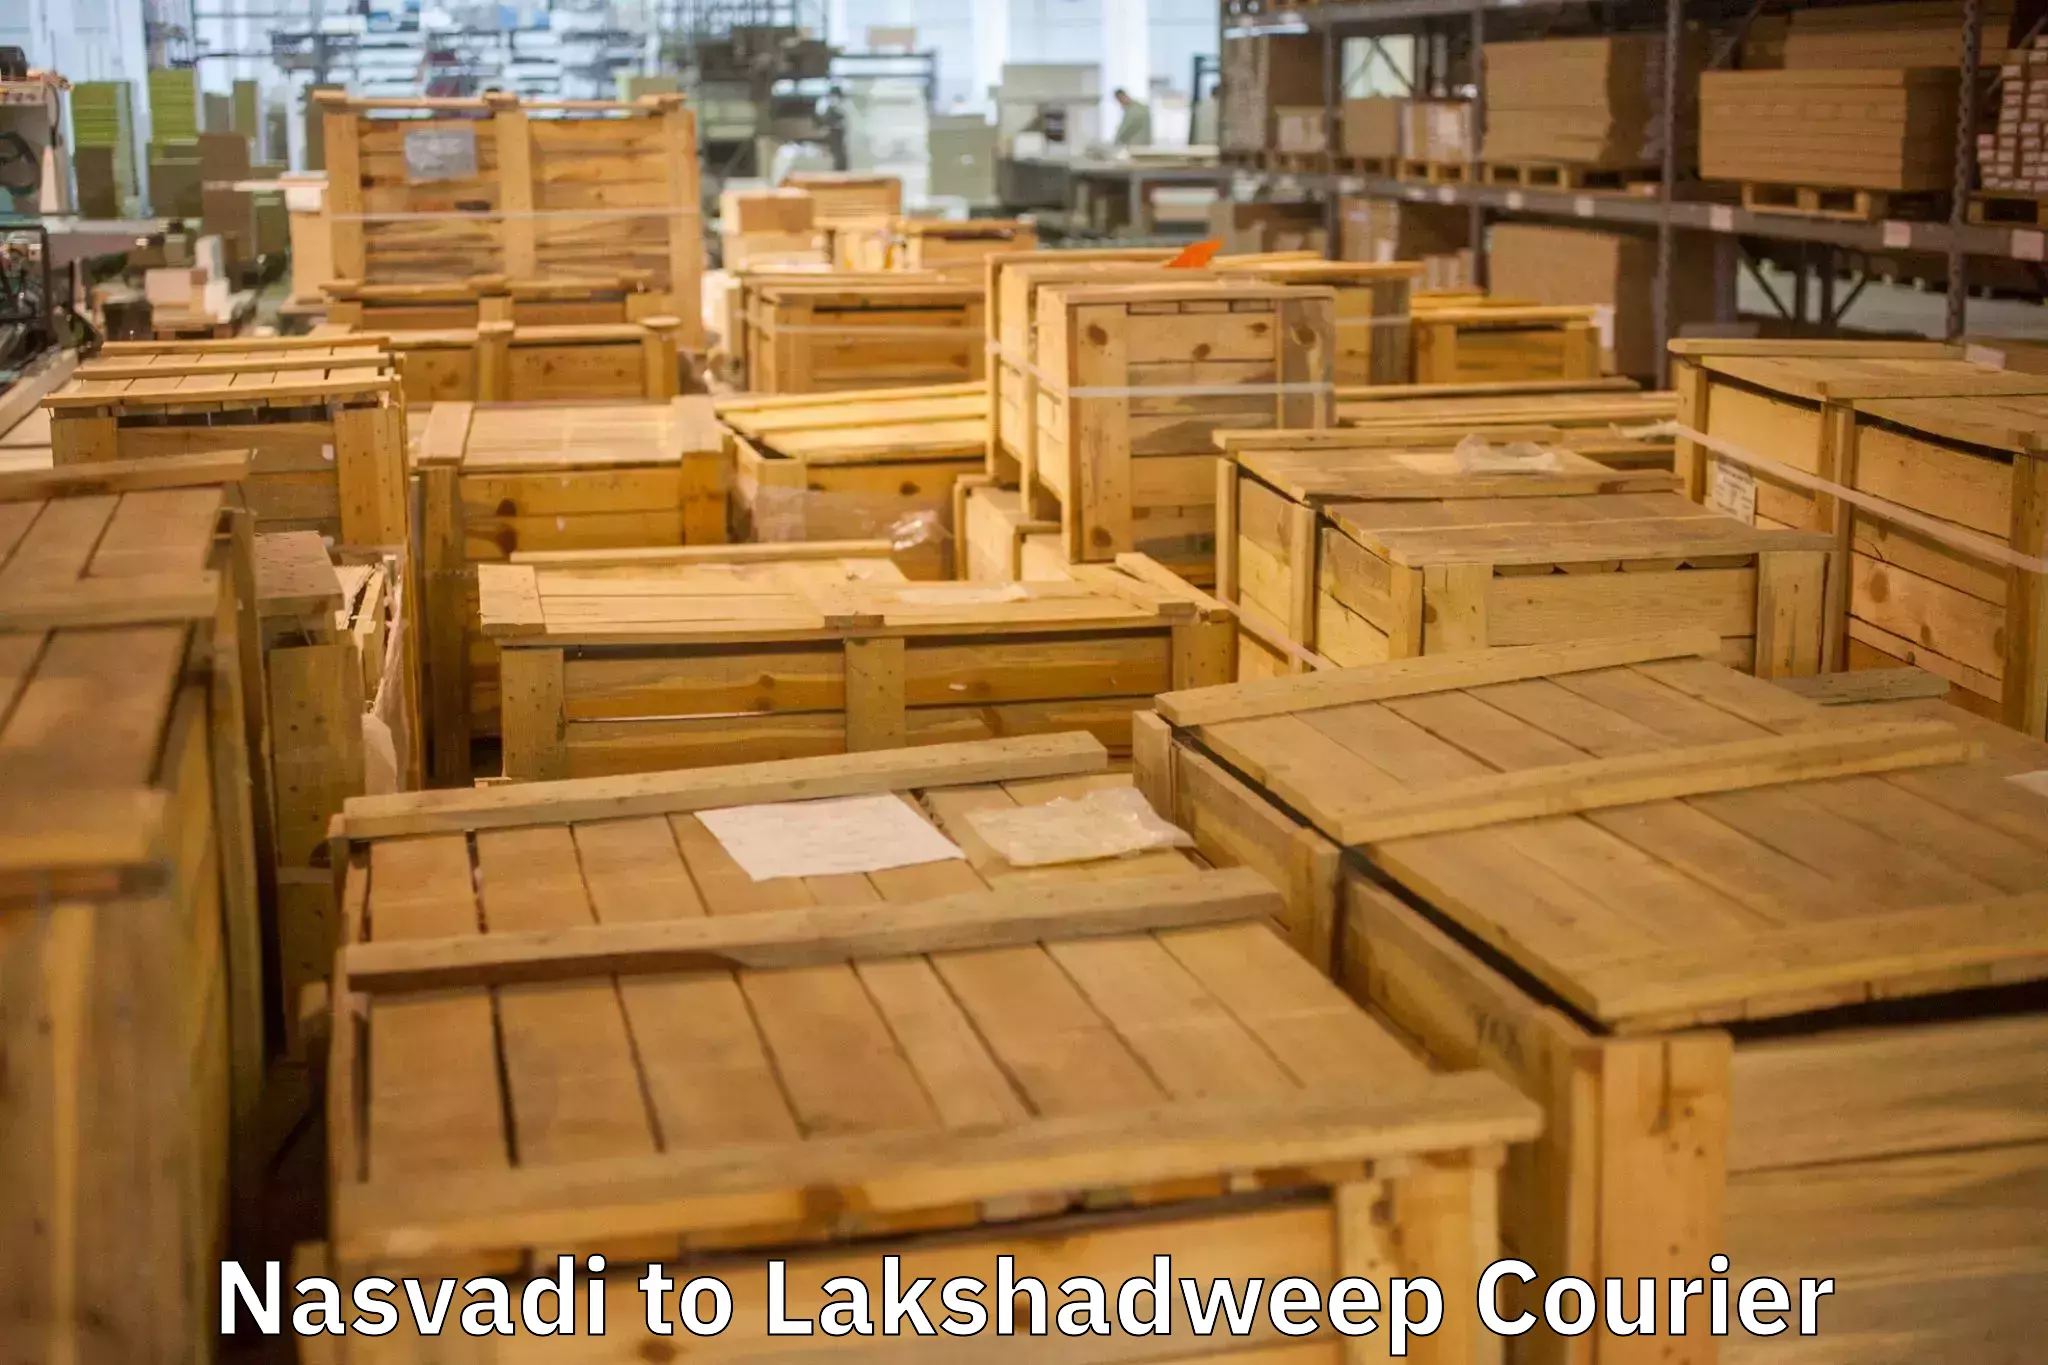 Dependable moving services in Nasvadi to Lakshadweep